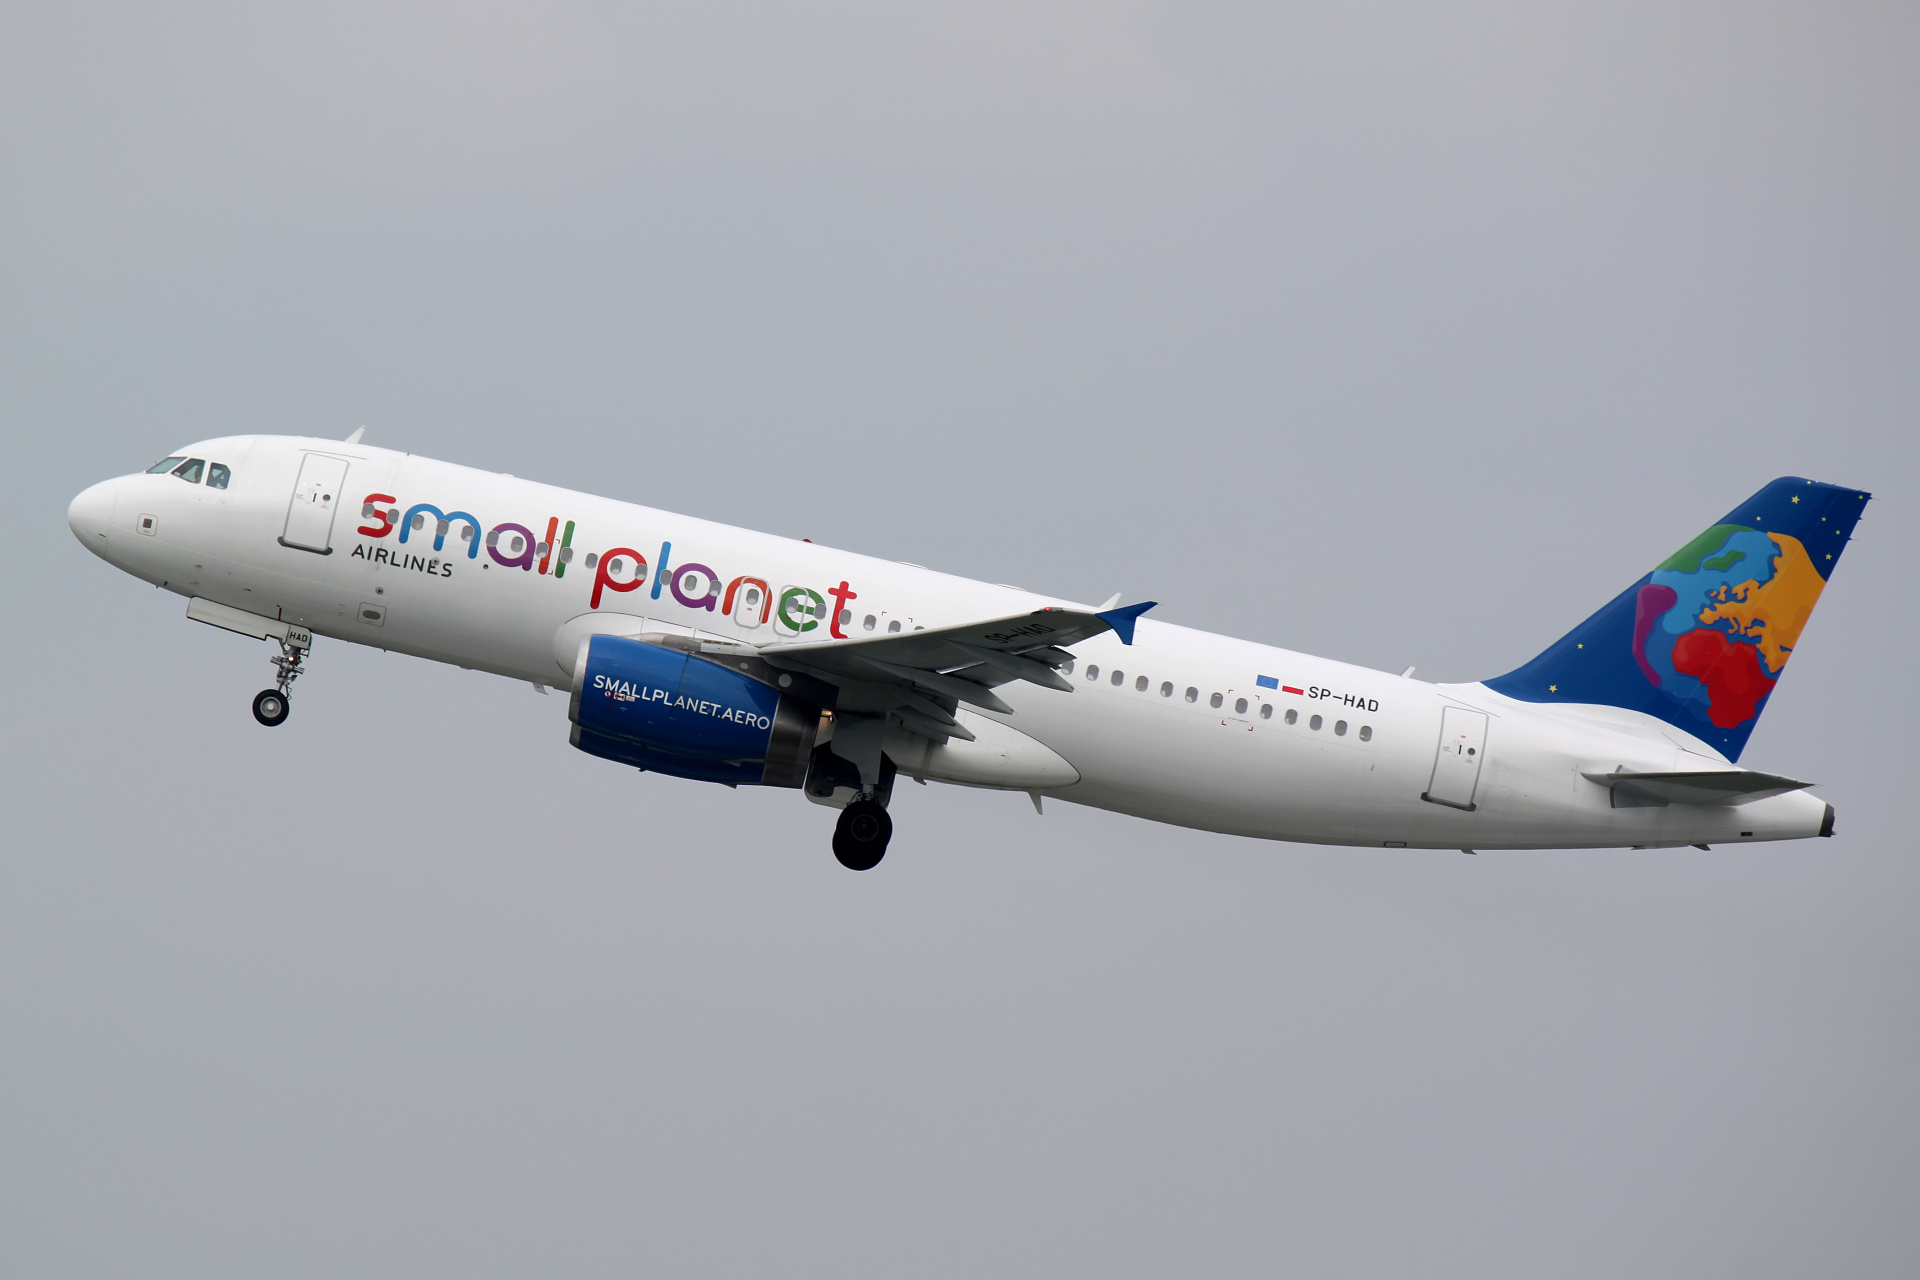 SP-HAD (Aircraft » EPWA Spotting » Airbus A320-200 » Small Planet Airlines)